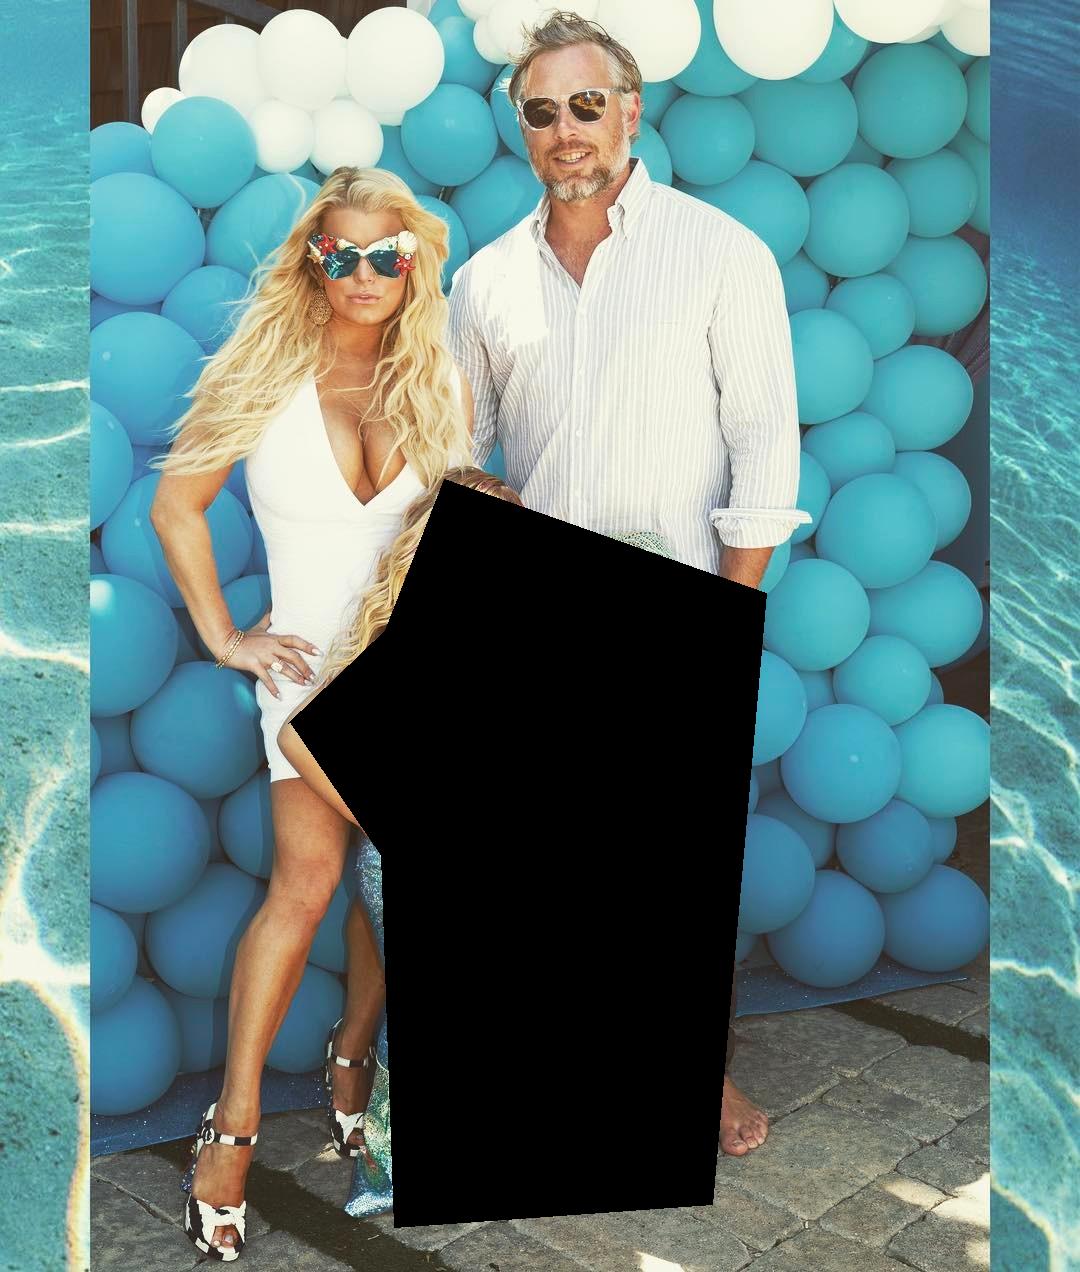 ZJessica Simpson -- Mix Social Network 280117 To 010817 008.jpg